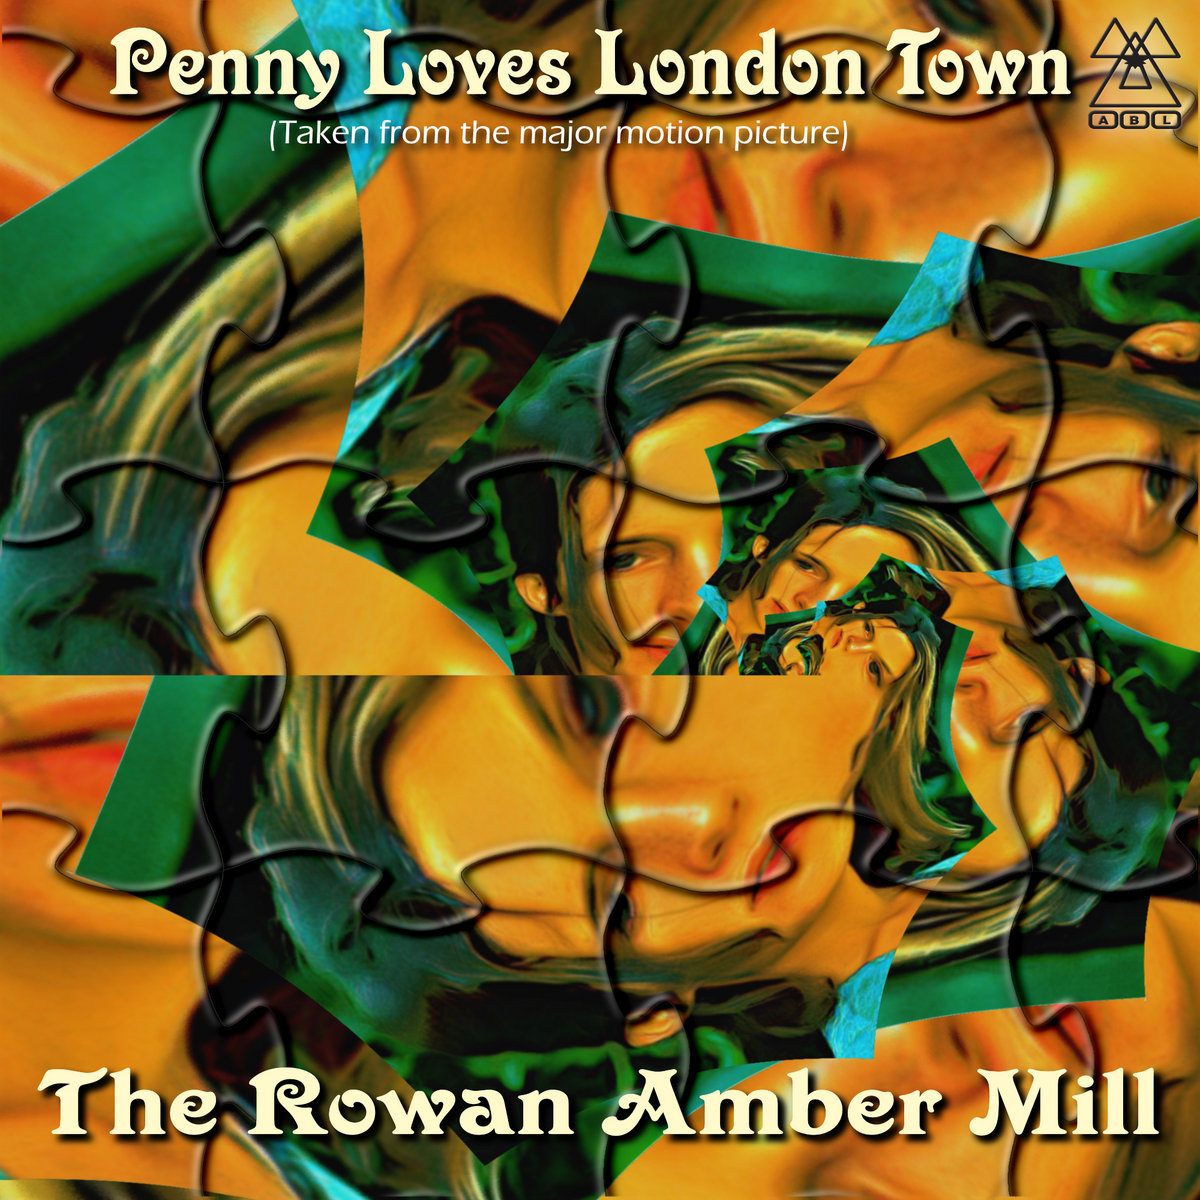 Penny Loves London Town by The Rowan Amber Mill